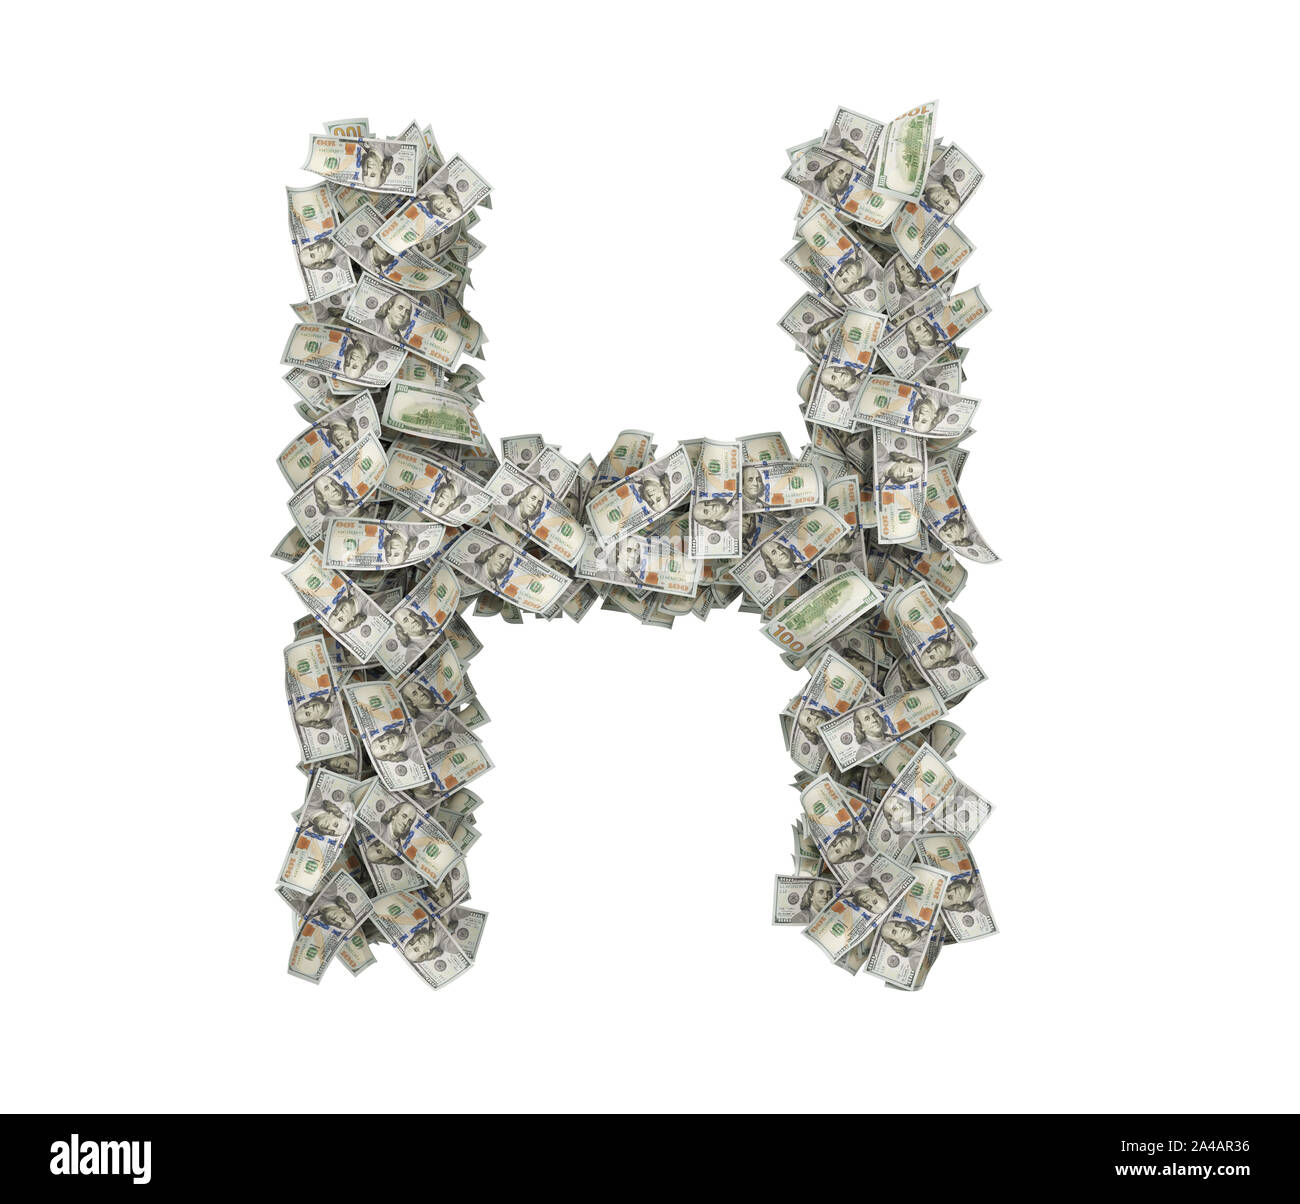 3d rendering of a large isolated large letter H made of many one hundred dollar bills. Money and bills. American currency. Alphabet and letters. Stock Photo